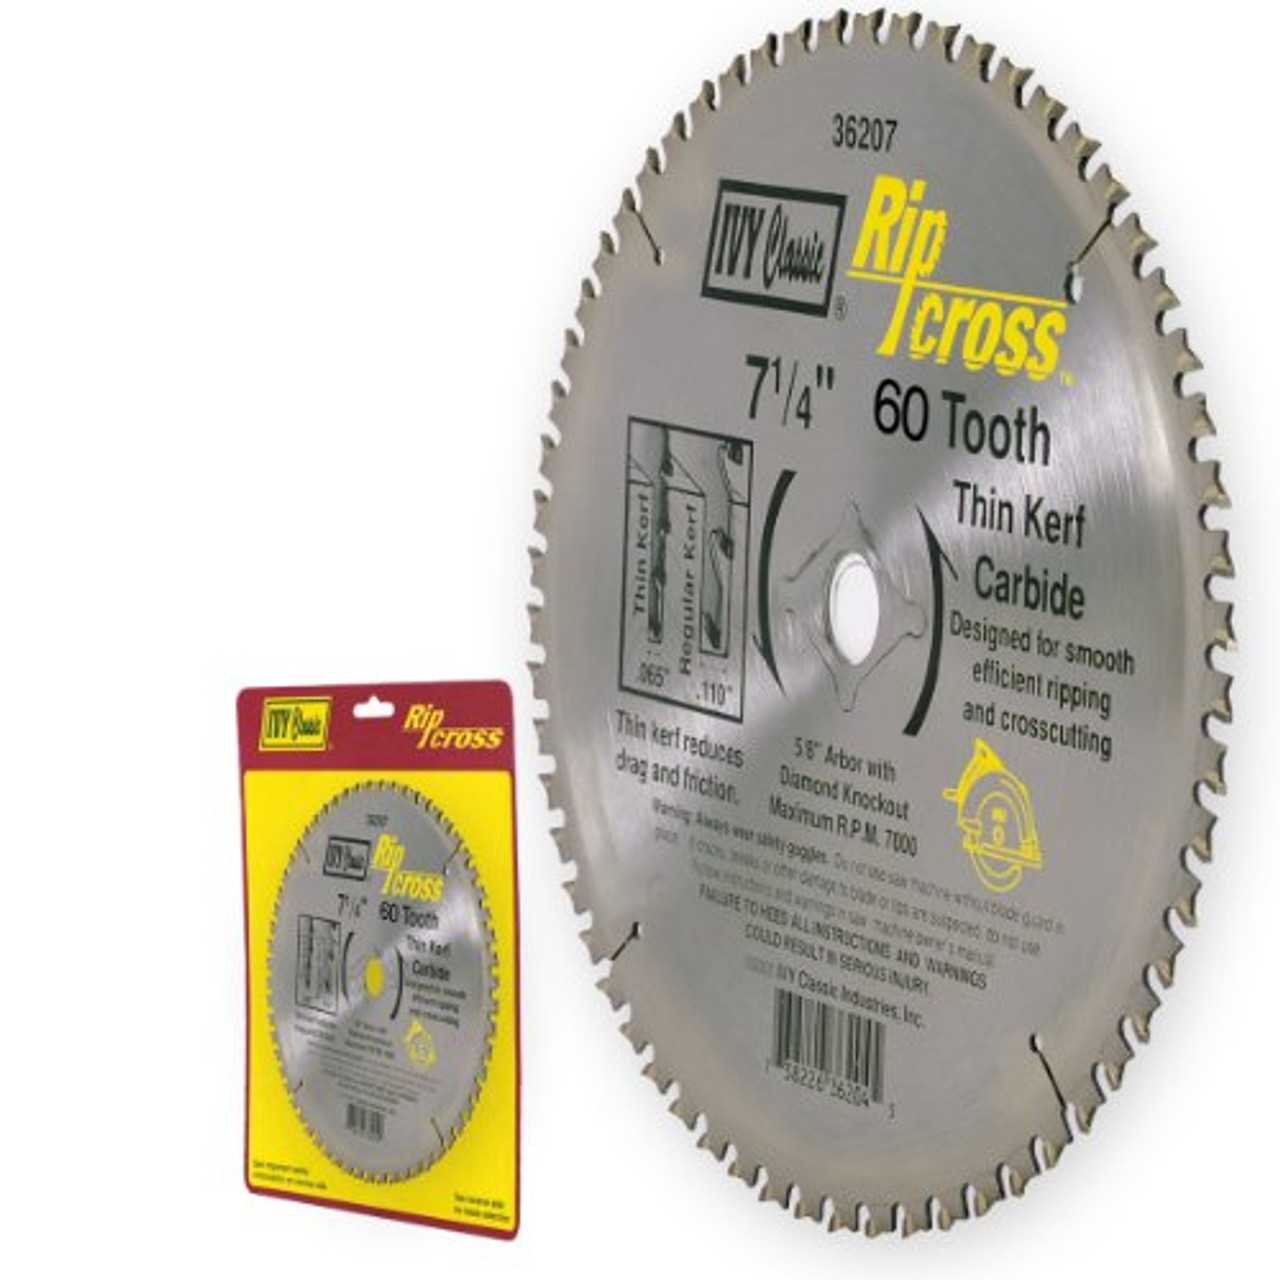 IVY Classic 36206 Ripcross 7-1/4-Inch 60 Tooth Thin Kerf Carbide Circular Saw Blade with 5/8-Inch Diamond Knockout Arbor, 1/Card